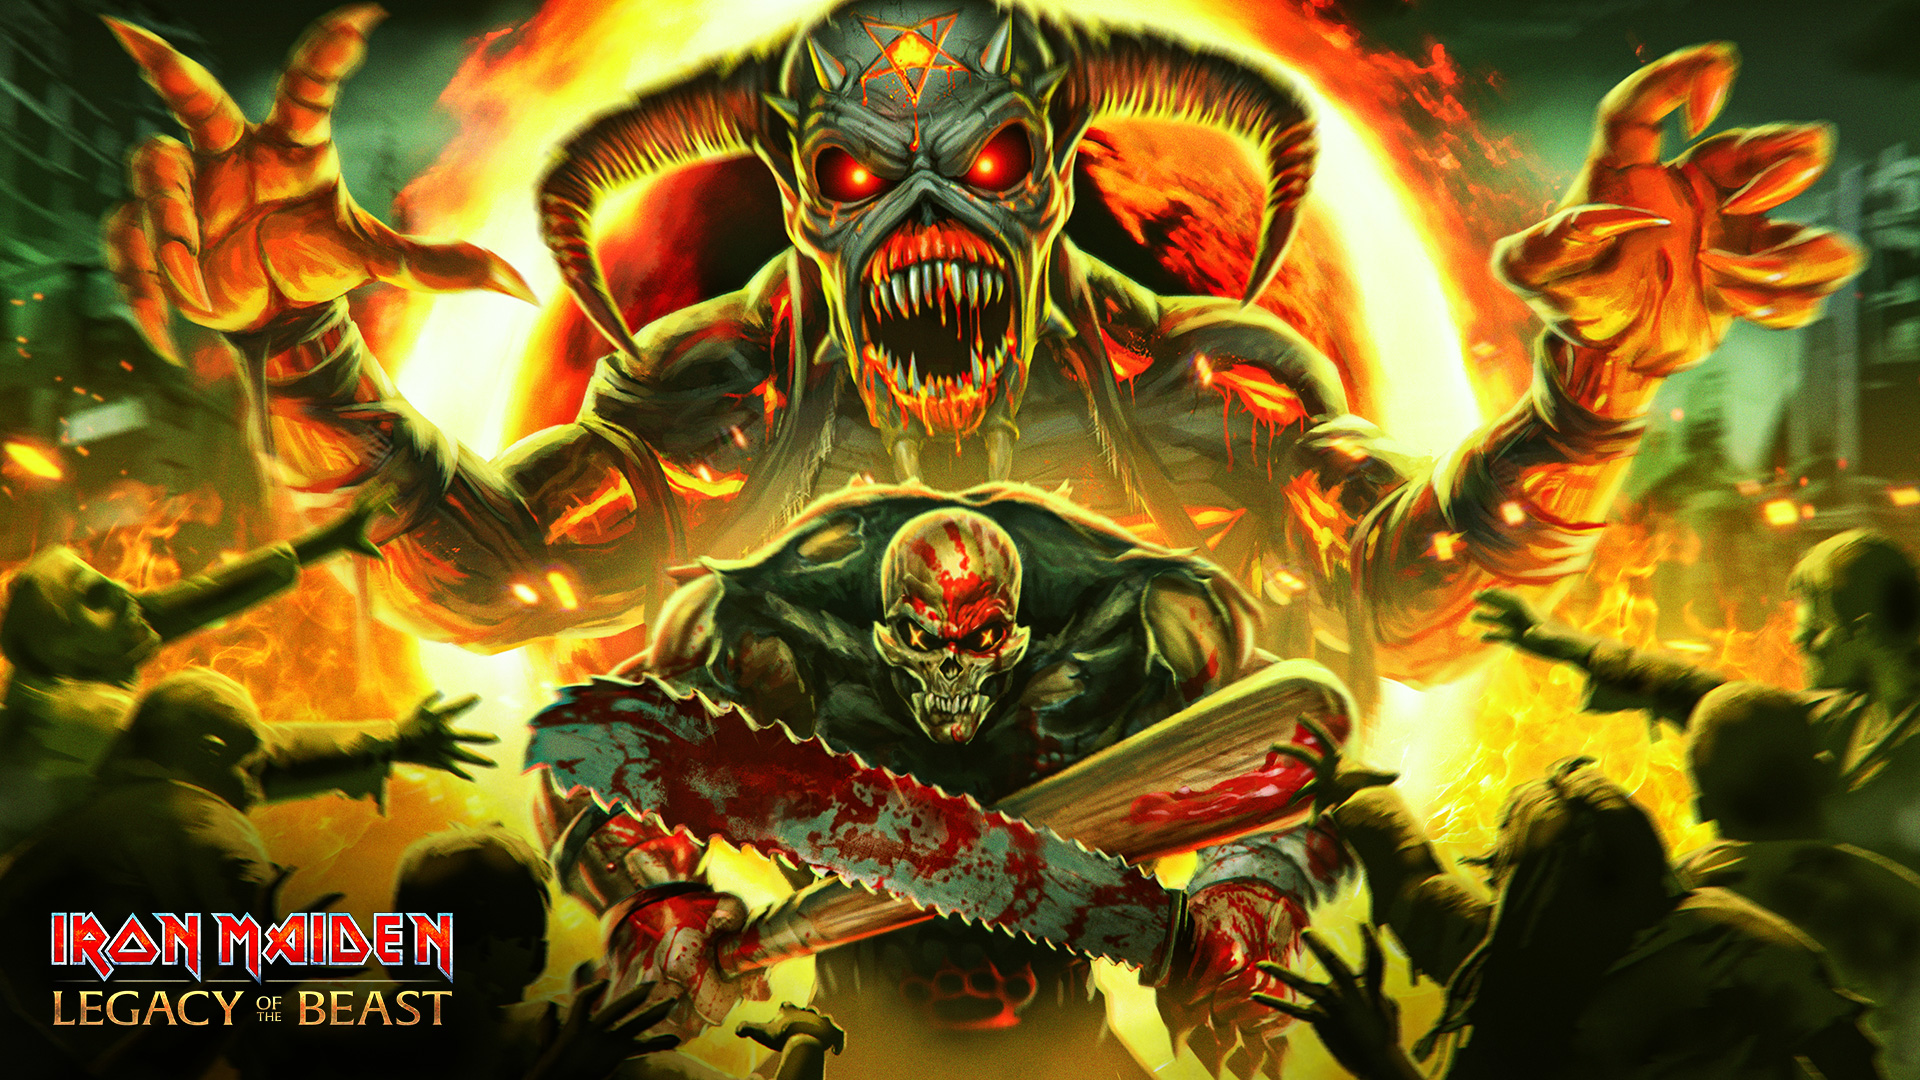 Five Finger Death Punch Wallpapers  Wallpaper Cave